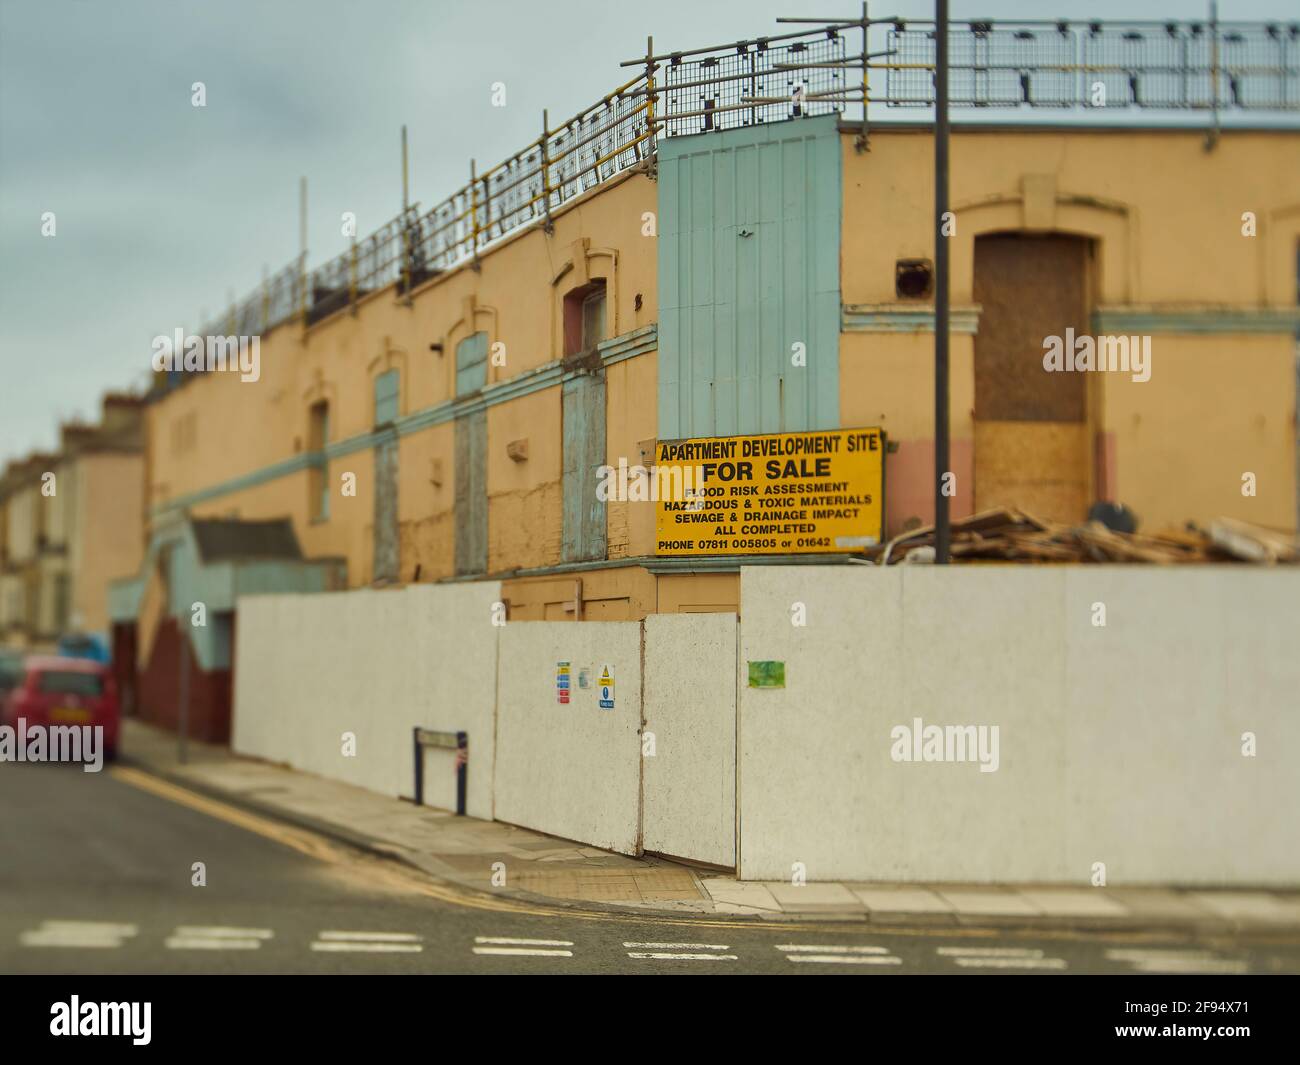 Redcar UK, Jun 2019 - A former night club, derelict and gutted, with a sign telling of future aspirations and hinting at the industrial past. Stock Photo